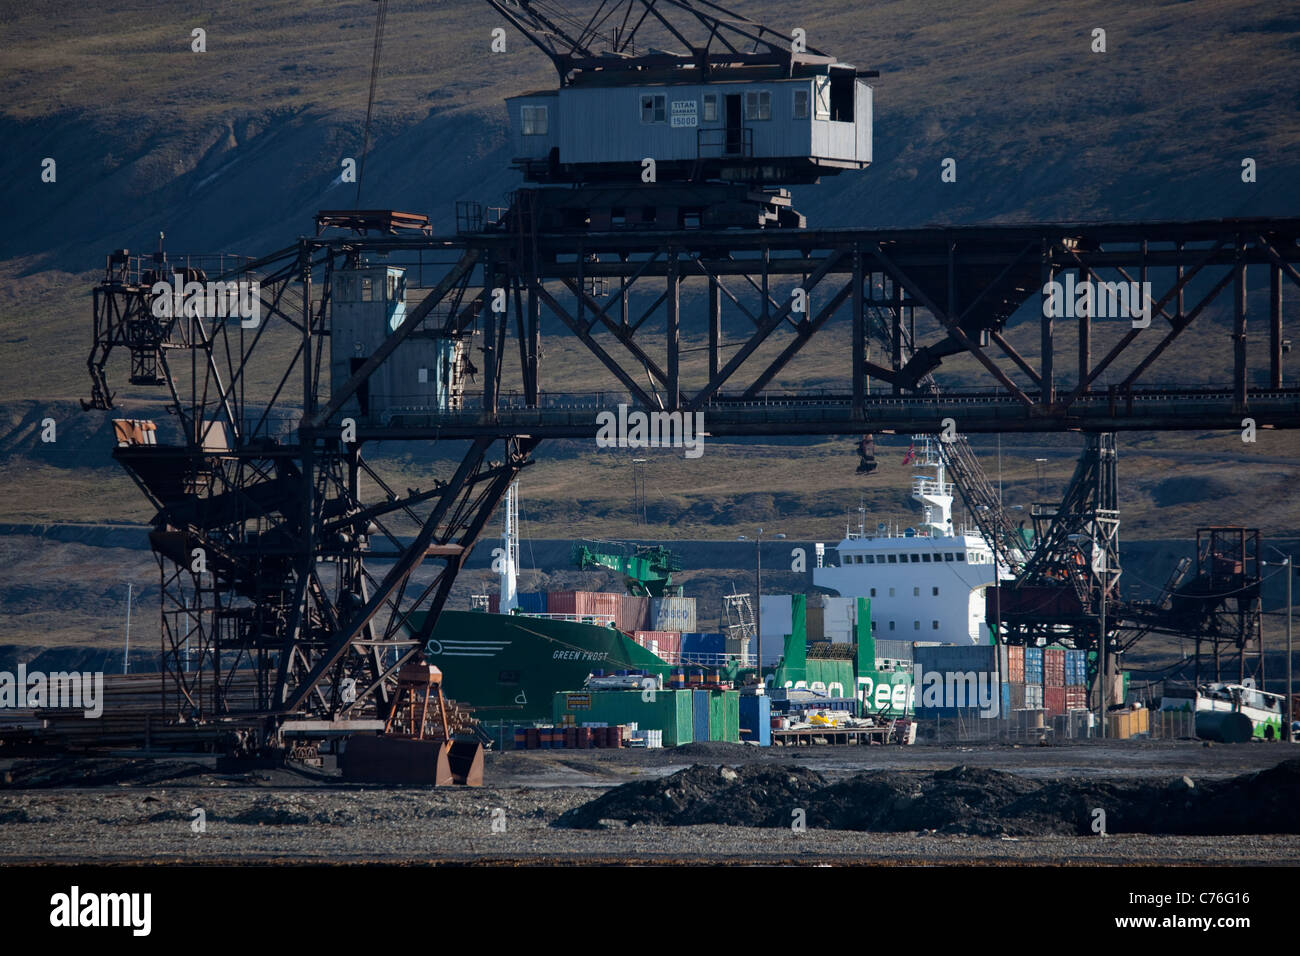 Cranes and ship at the port of Longyearbyen, Spitsbergen, in the archipelago of Svalbard. Stock Photo